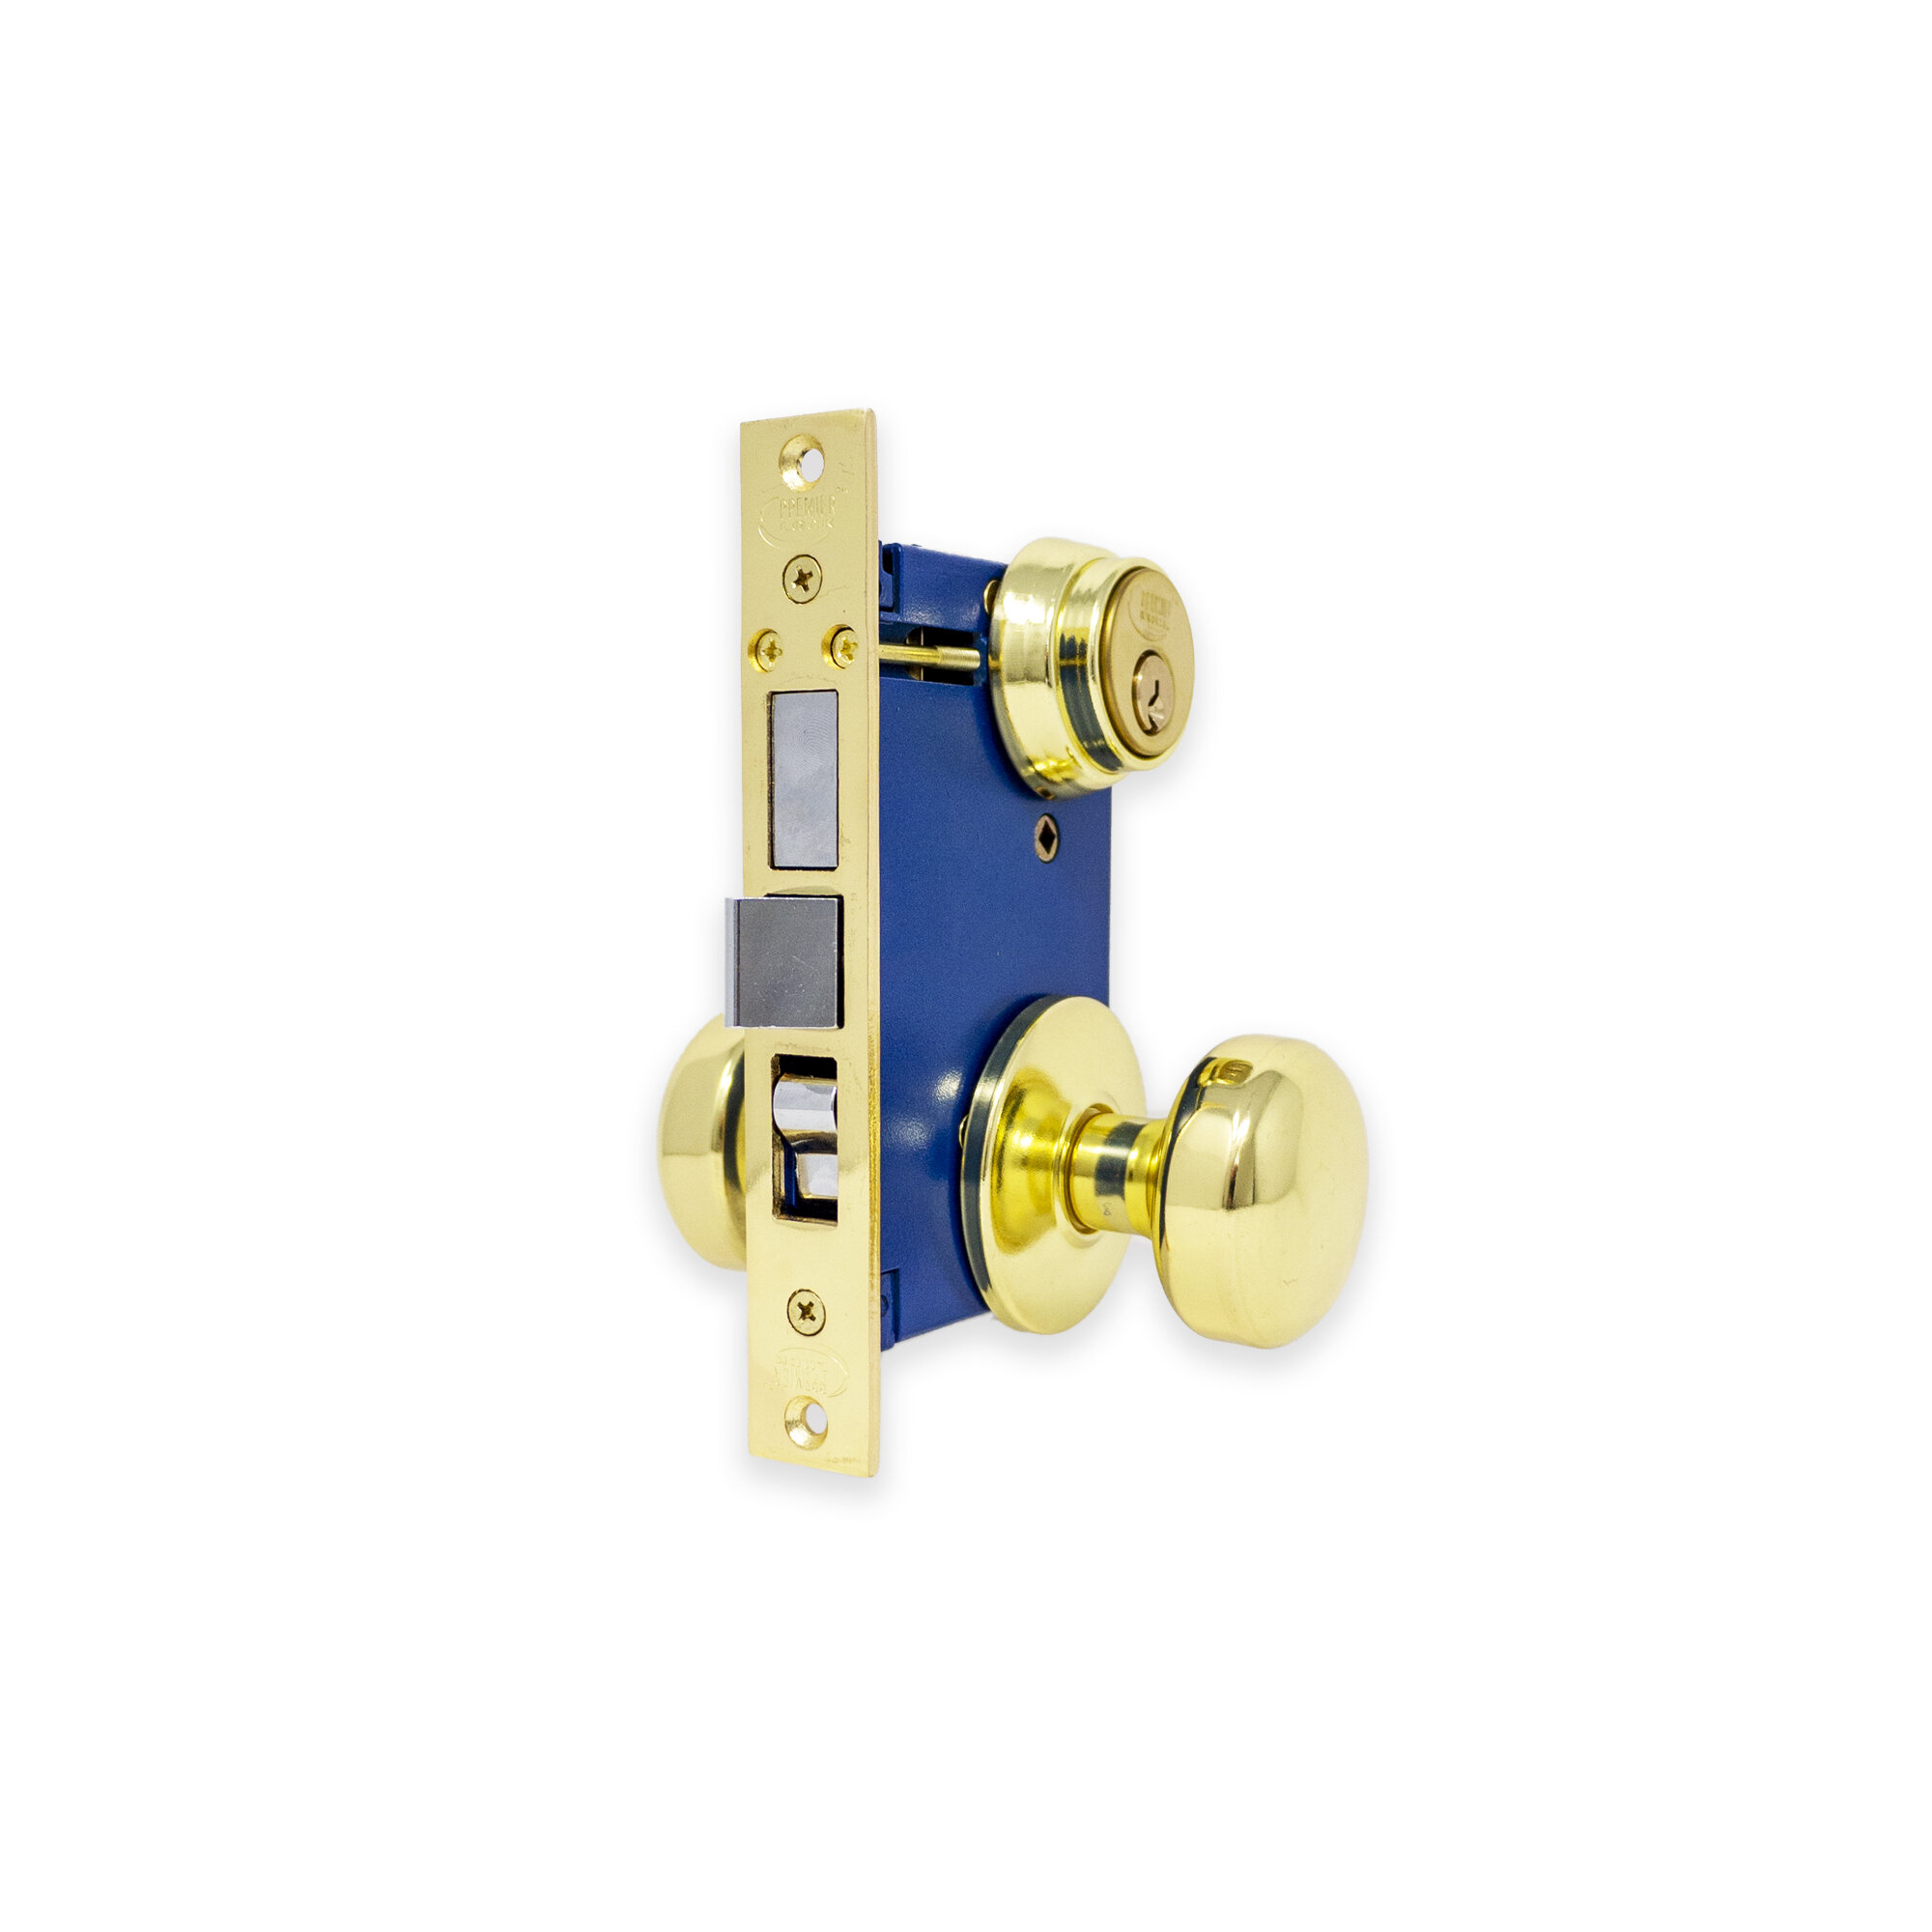 Premier Lock Brass Mortise Entry Gate Right Hand Door Lock Set With 2.5 In.  Backset And SC1 Keys Wayfair Canada